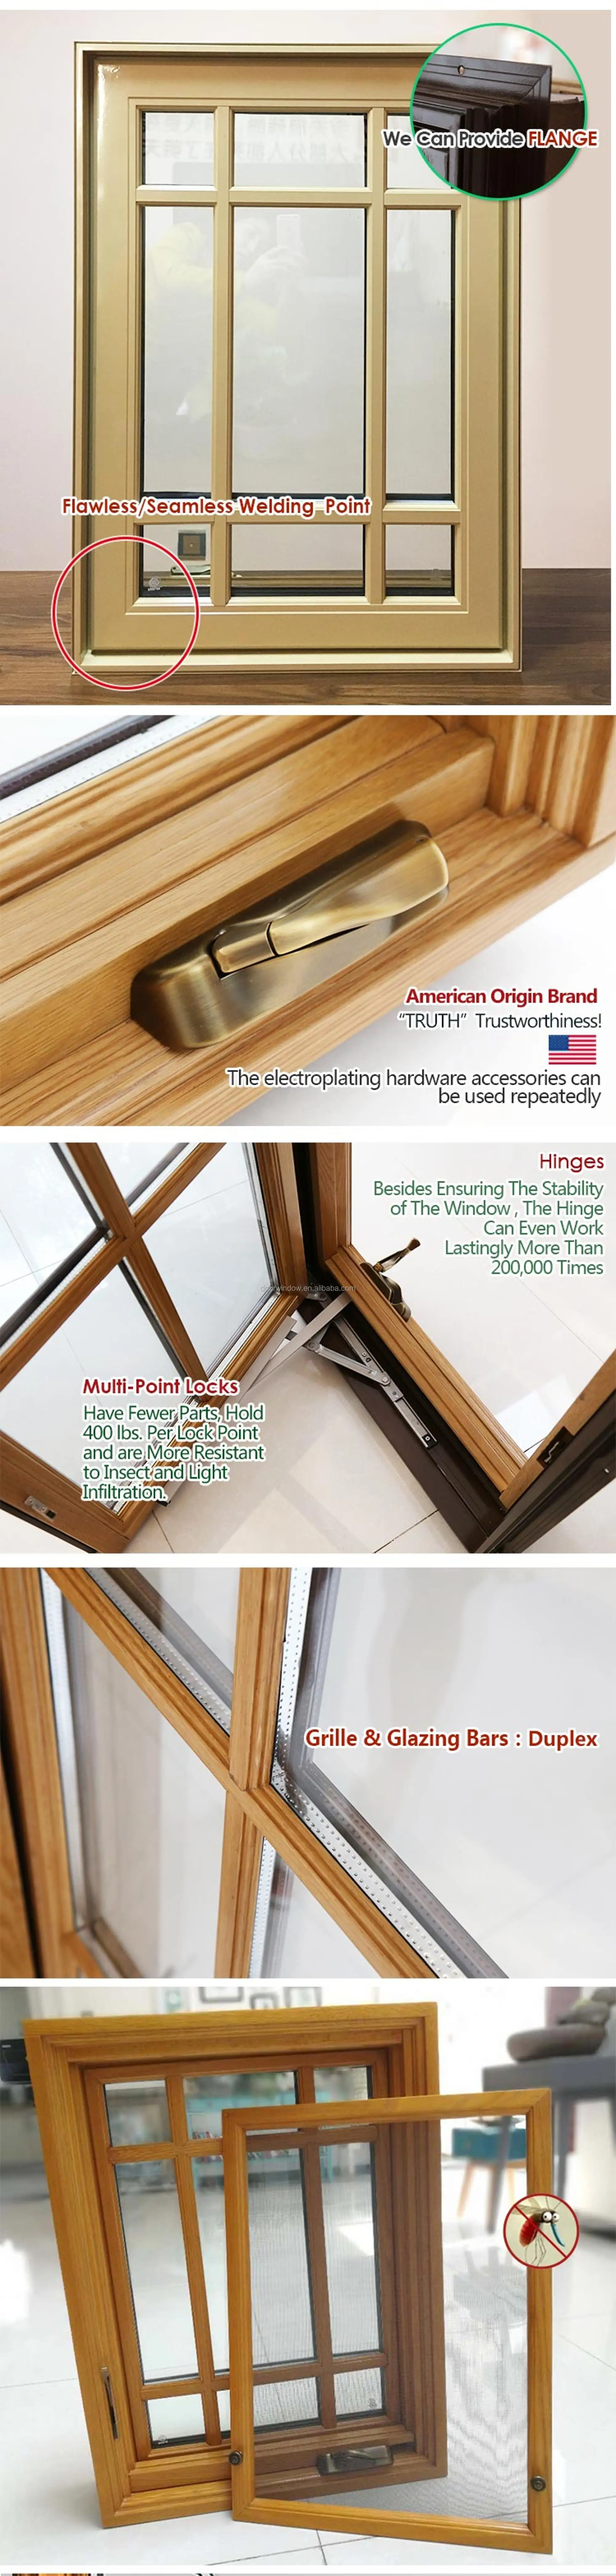 American standard wood aluminum frame crank open window with grill design and mosquito net